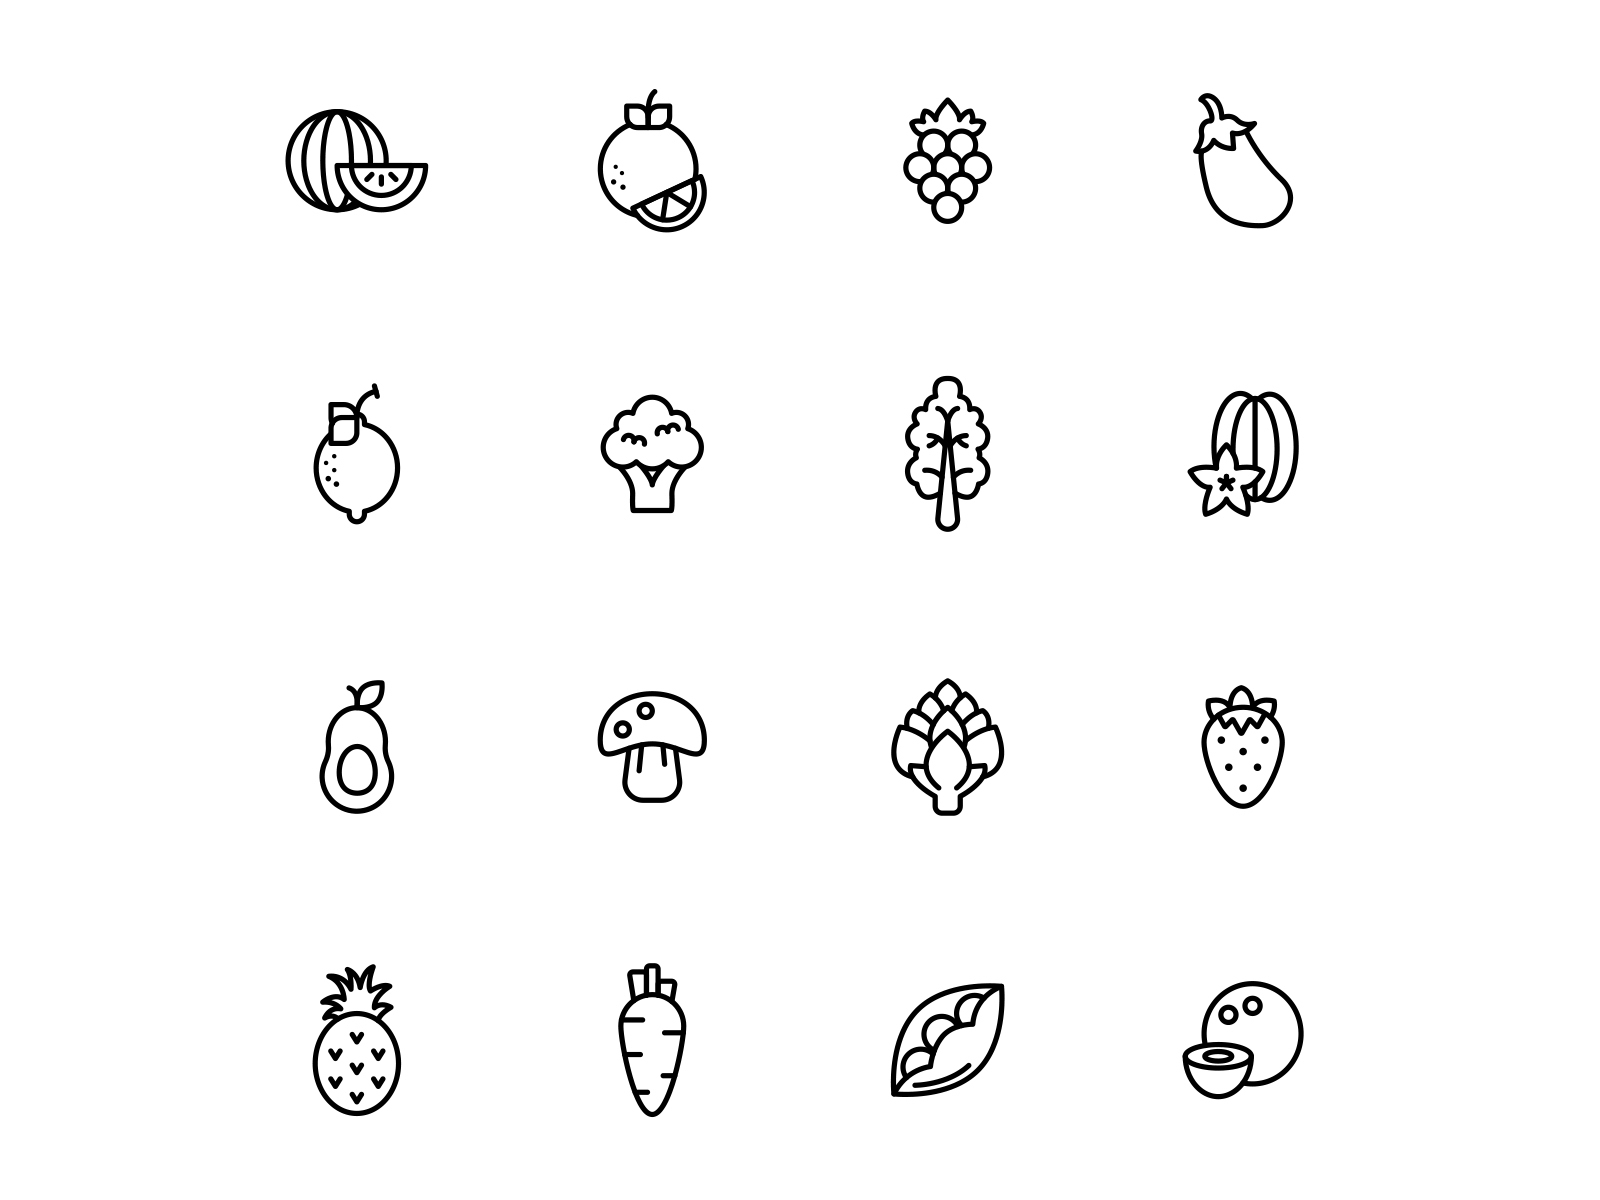 Fruits and Vegetables Icons by Unblast on Dribbble